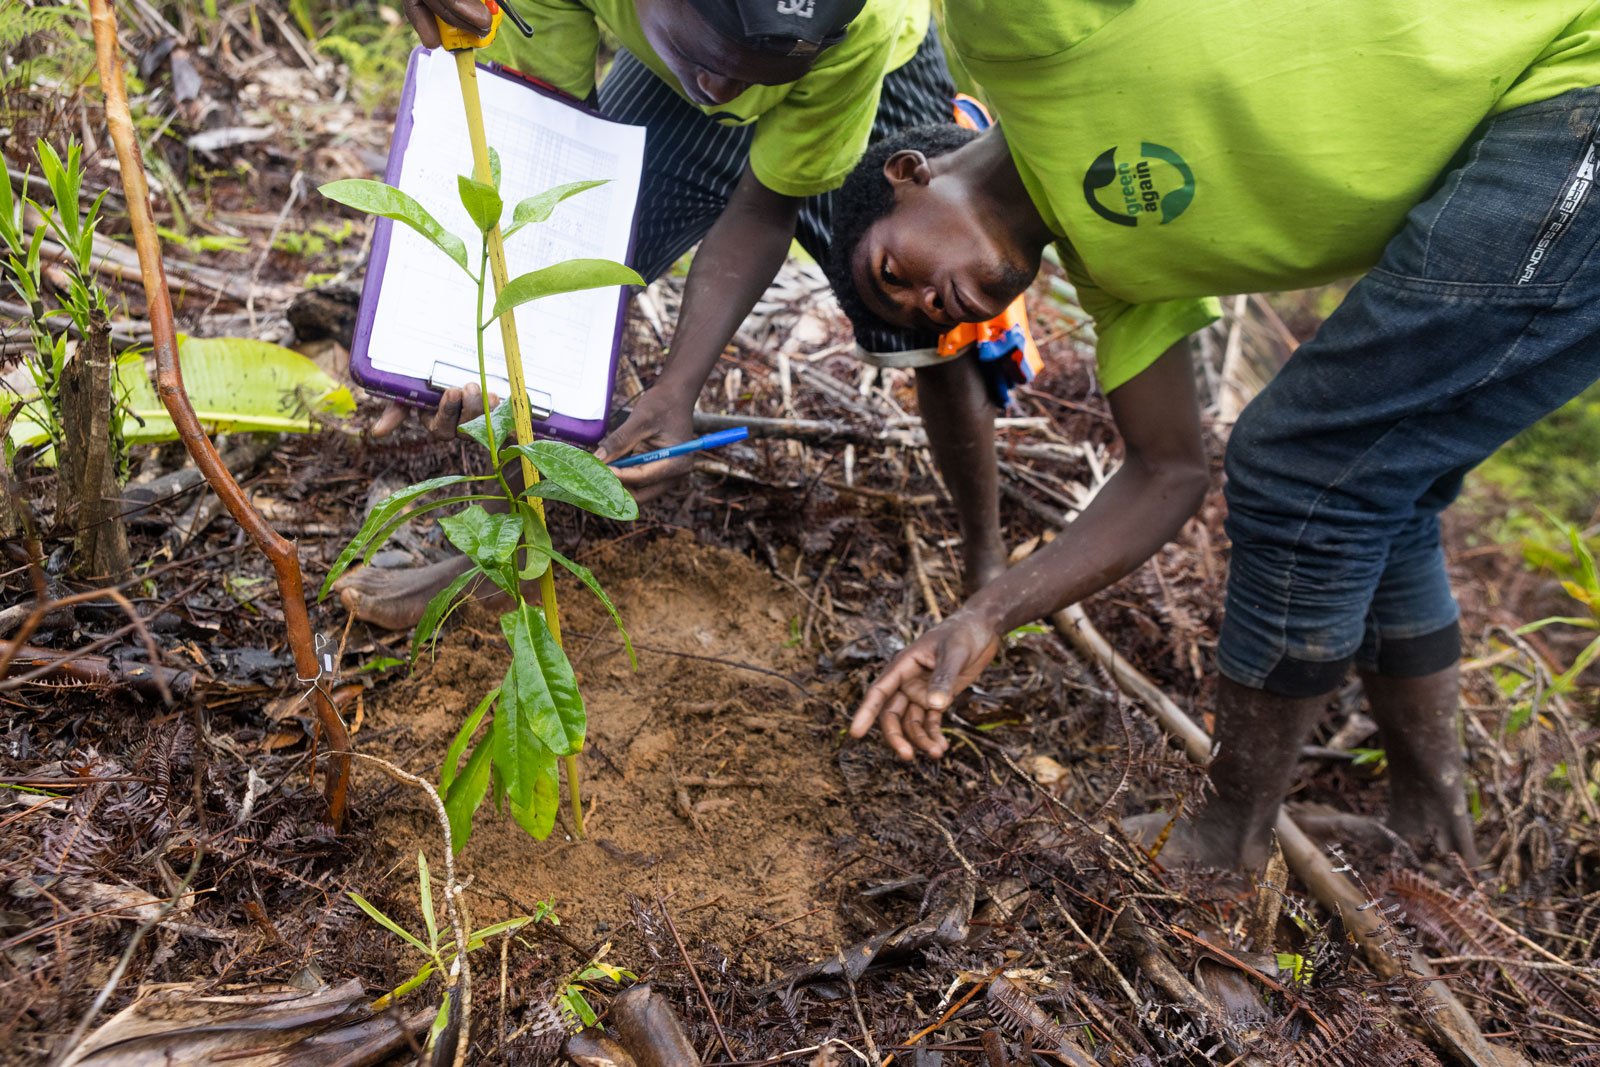  PICTURED: NG and Flavi measure a newly planted tree and record its height on a hillside just outside of Tsarasoatra, Madagascar. August 2022. PC: Jenny Mayfield for Green Again Madagascar © 